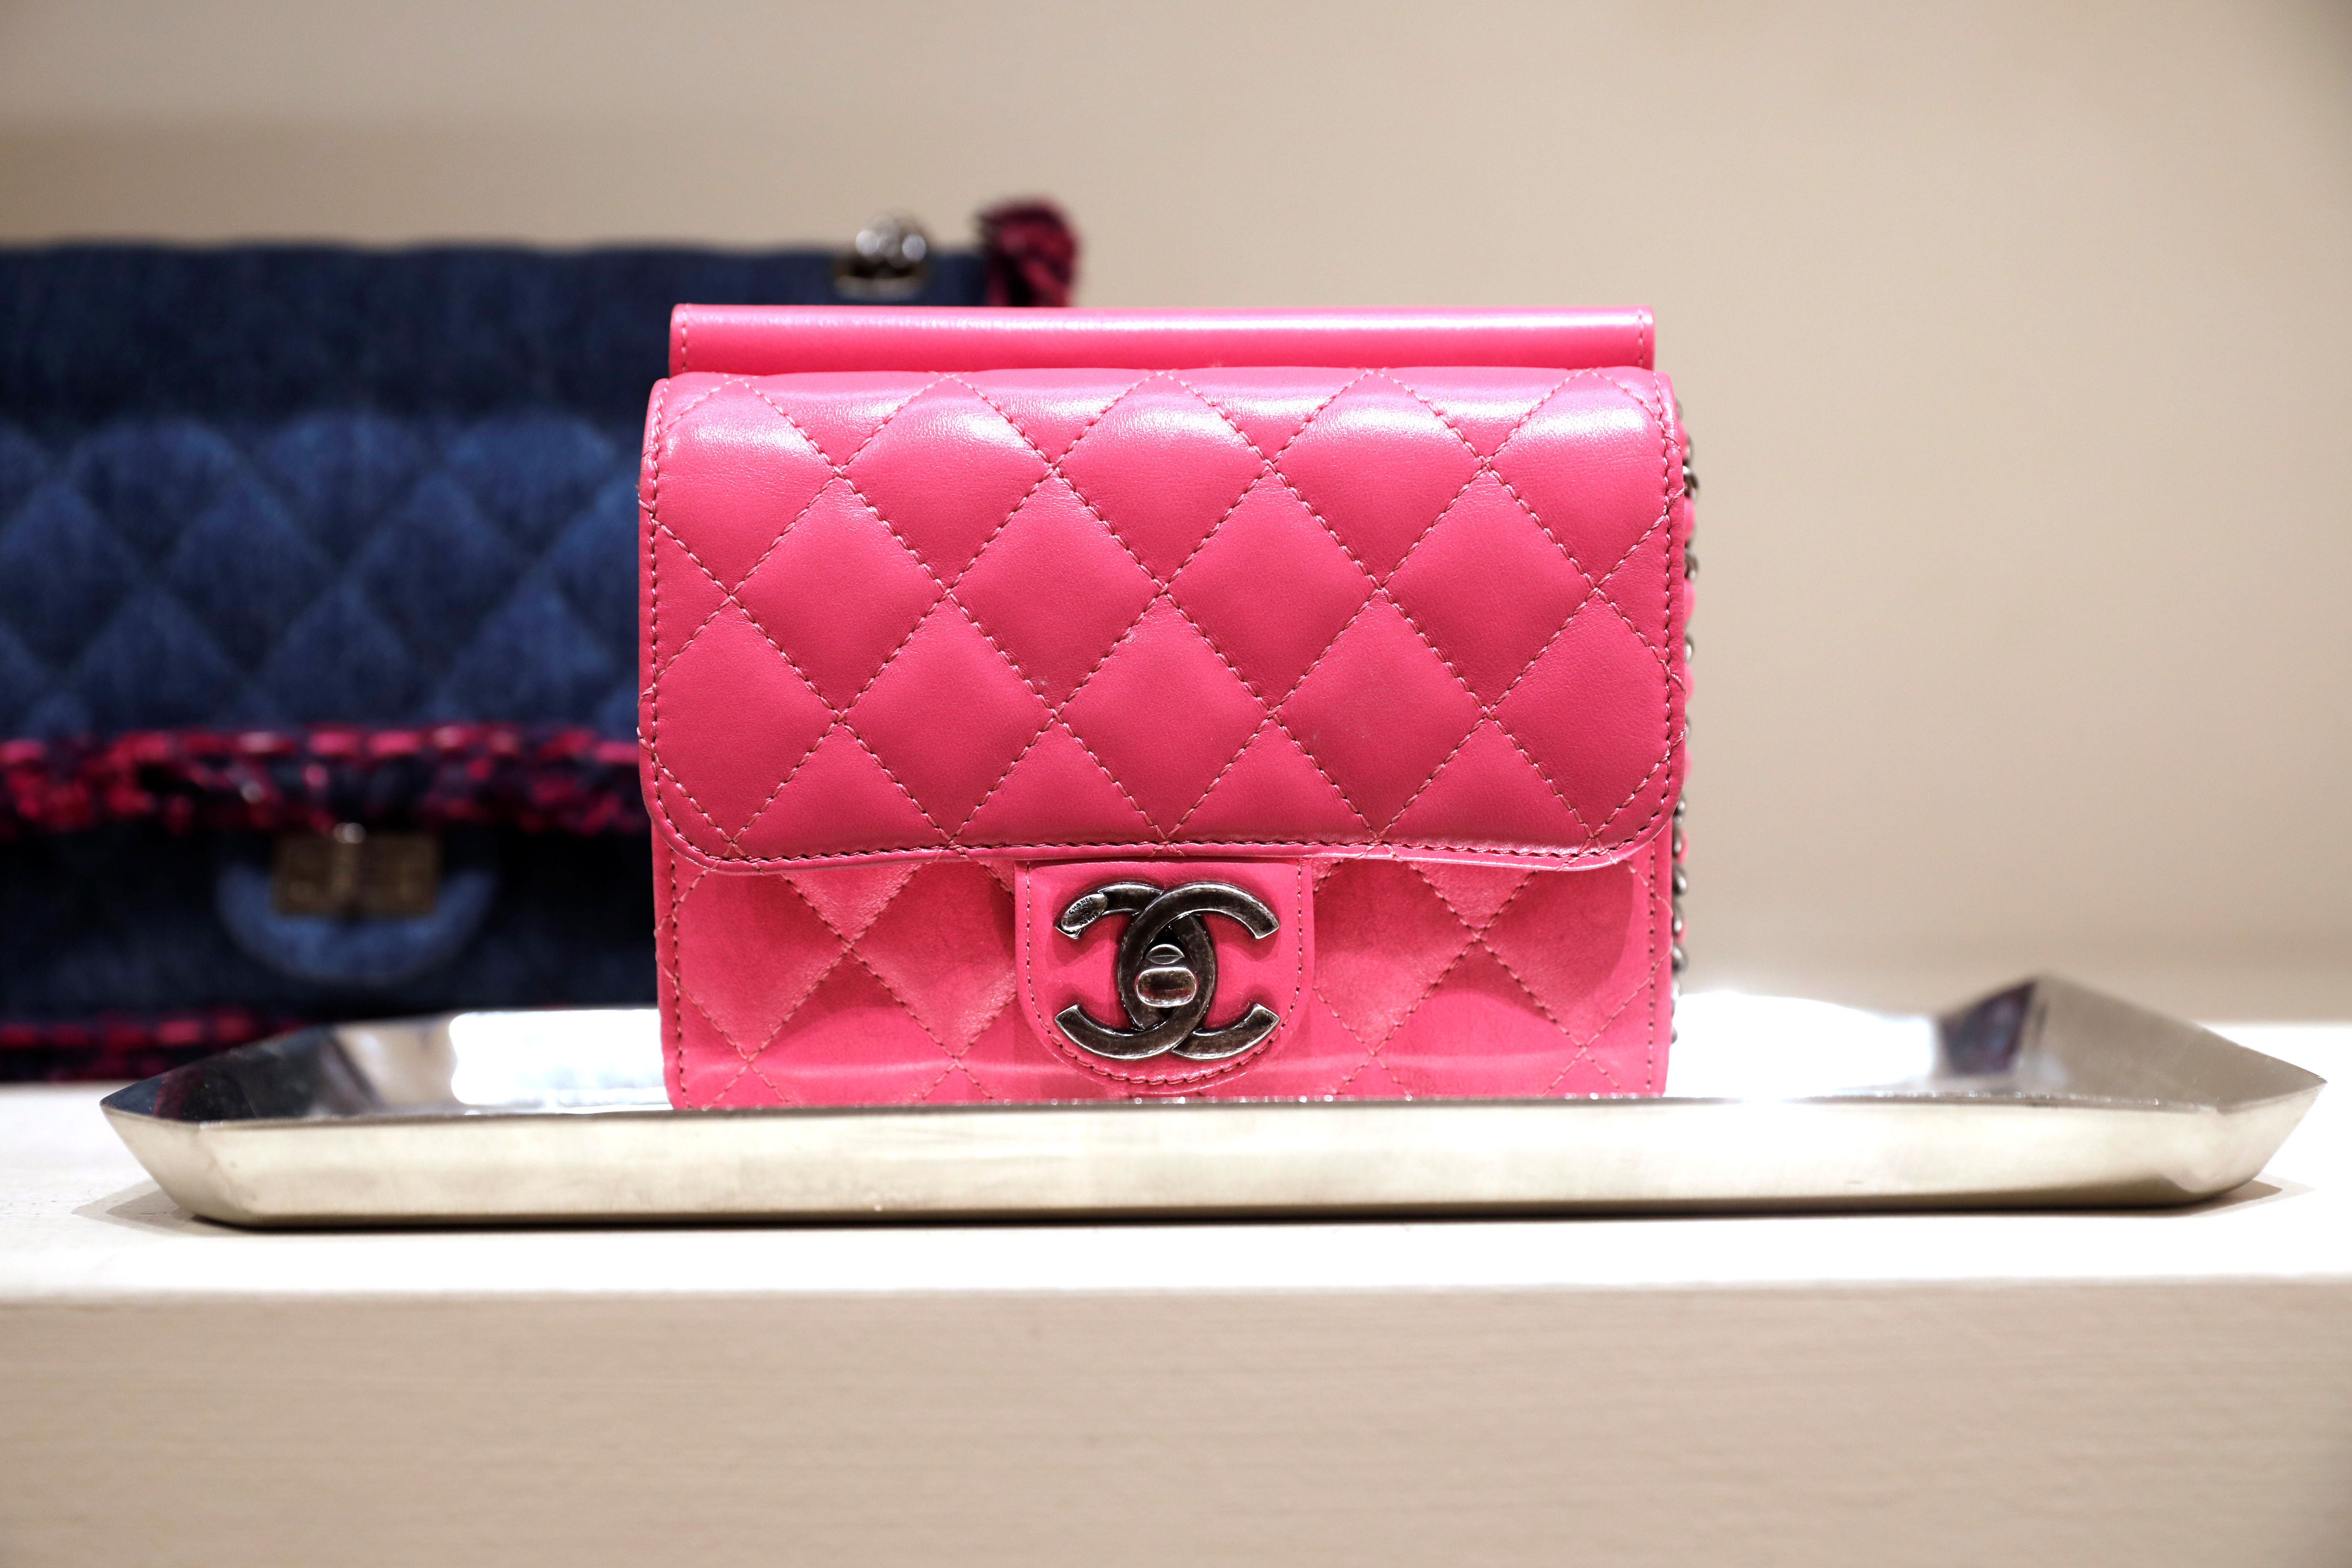 Chanel hikes handbag prices in runup to Christmas  Reuters